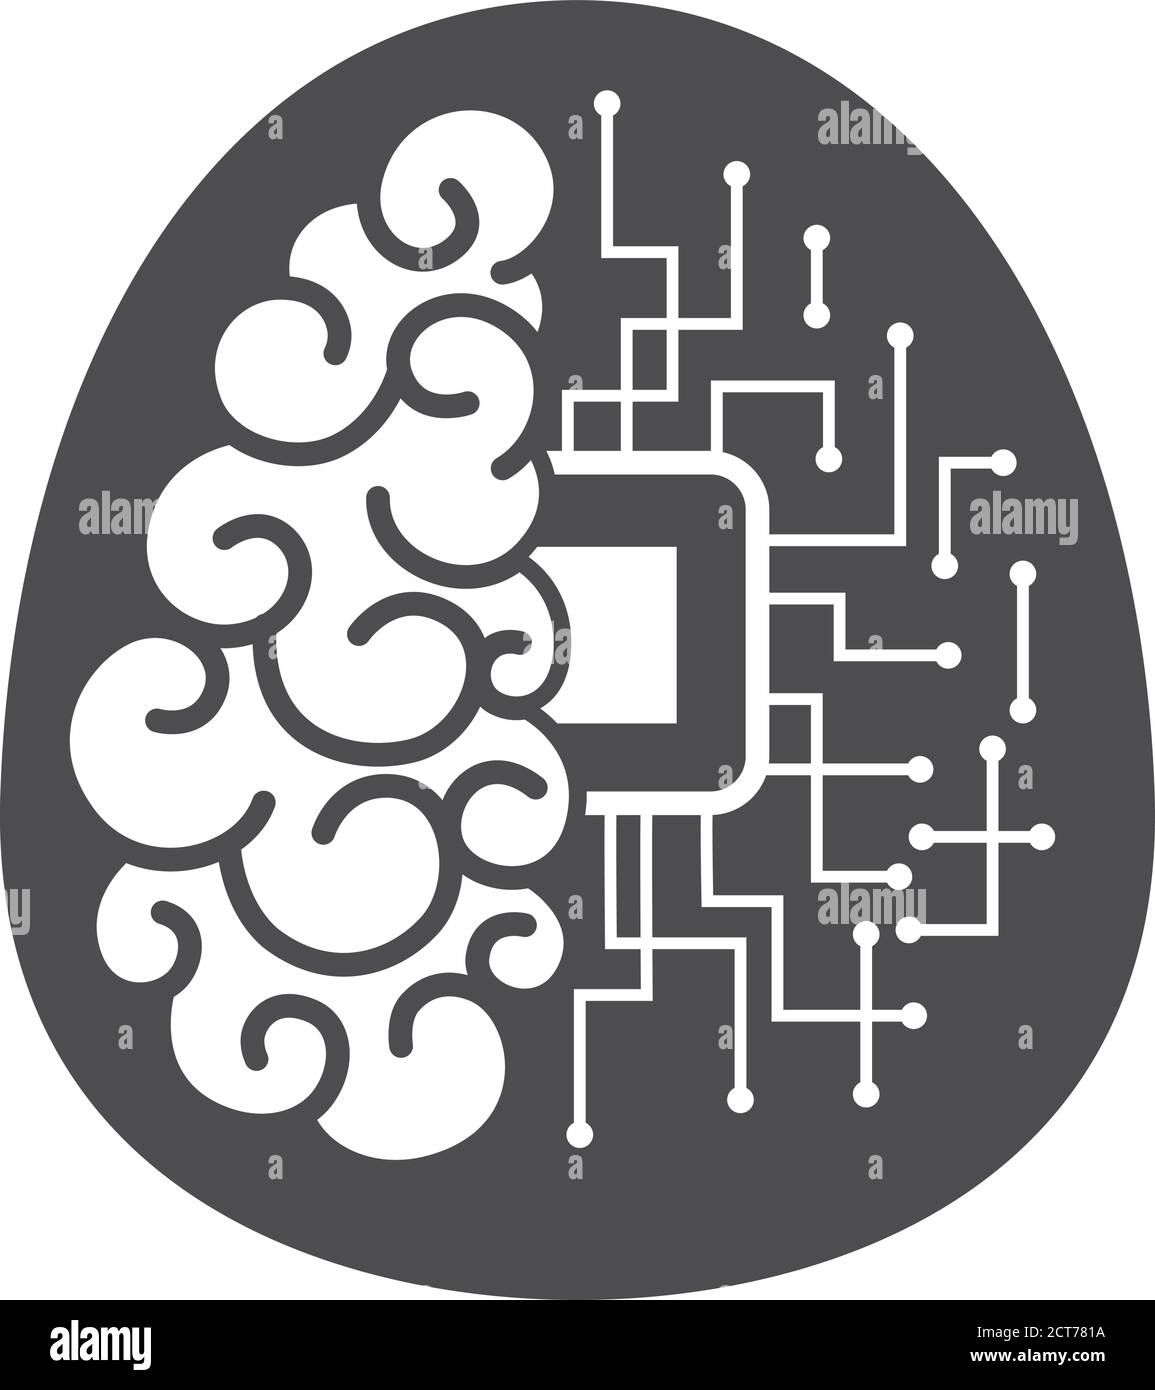 Artificial intelligence concept icon in black and white. Human head with electronic brain implant. Vector illustration. Stock Vector